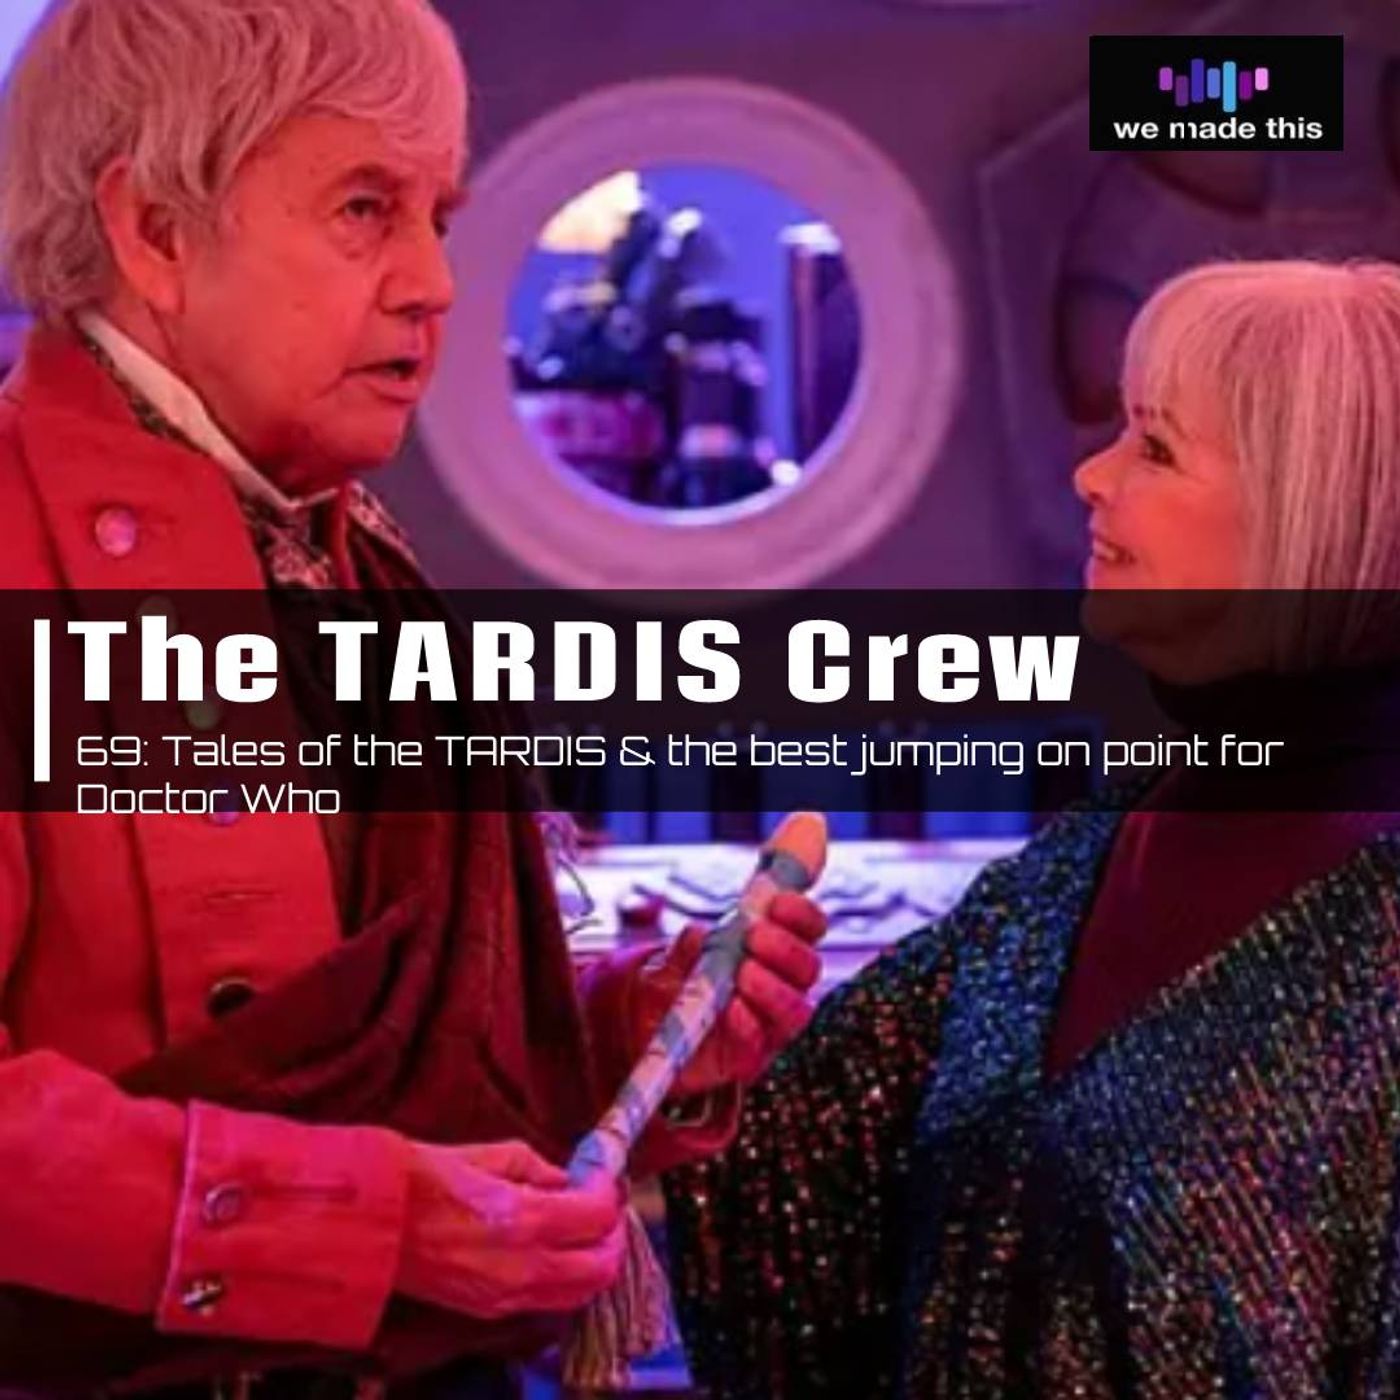 69. Tales of the TARDIS & the best jumping on point for Doctor Who